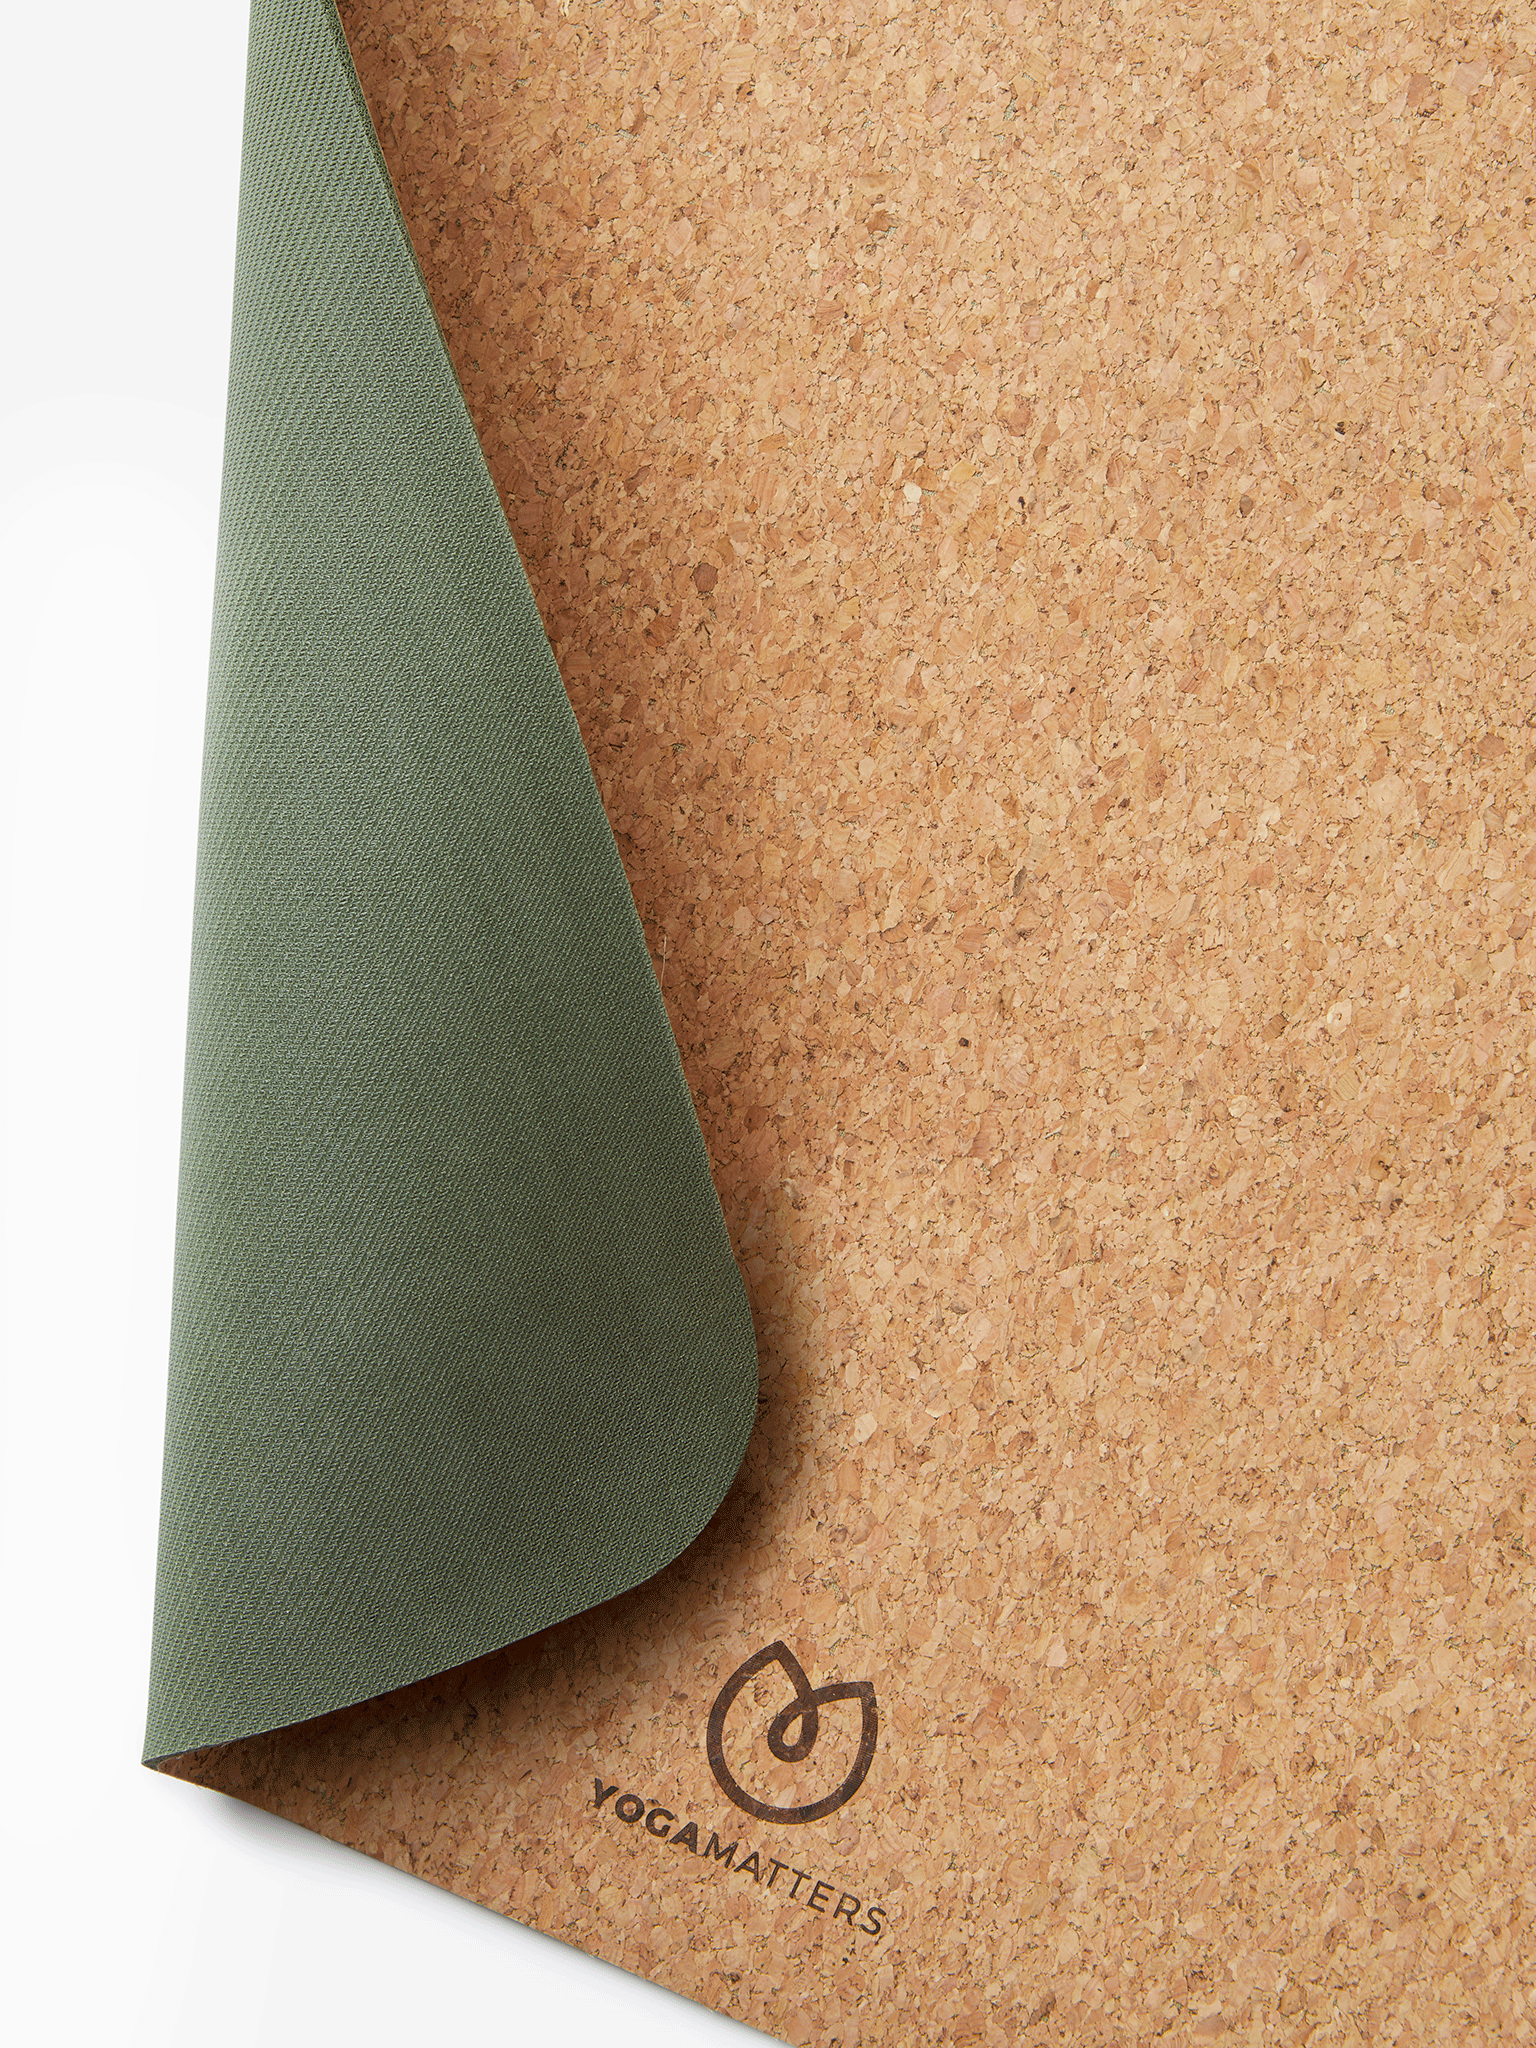 Yogamatters green and cork yoga mat close-up, eco-friendly non-slip surface, partially rolled revealing textured design, side shot with visible brand logo